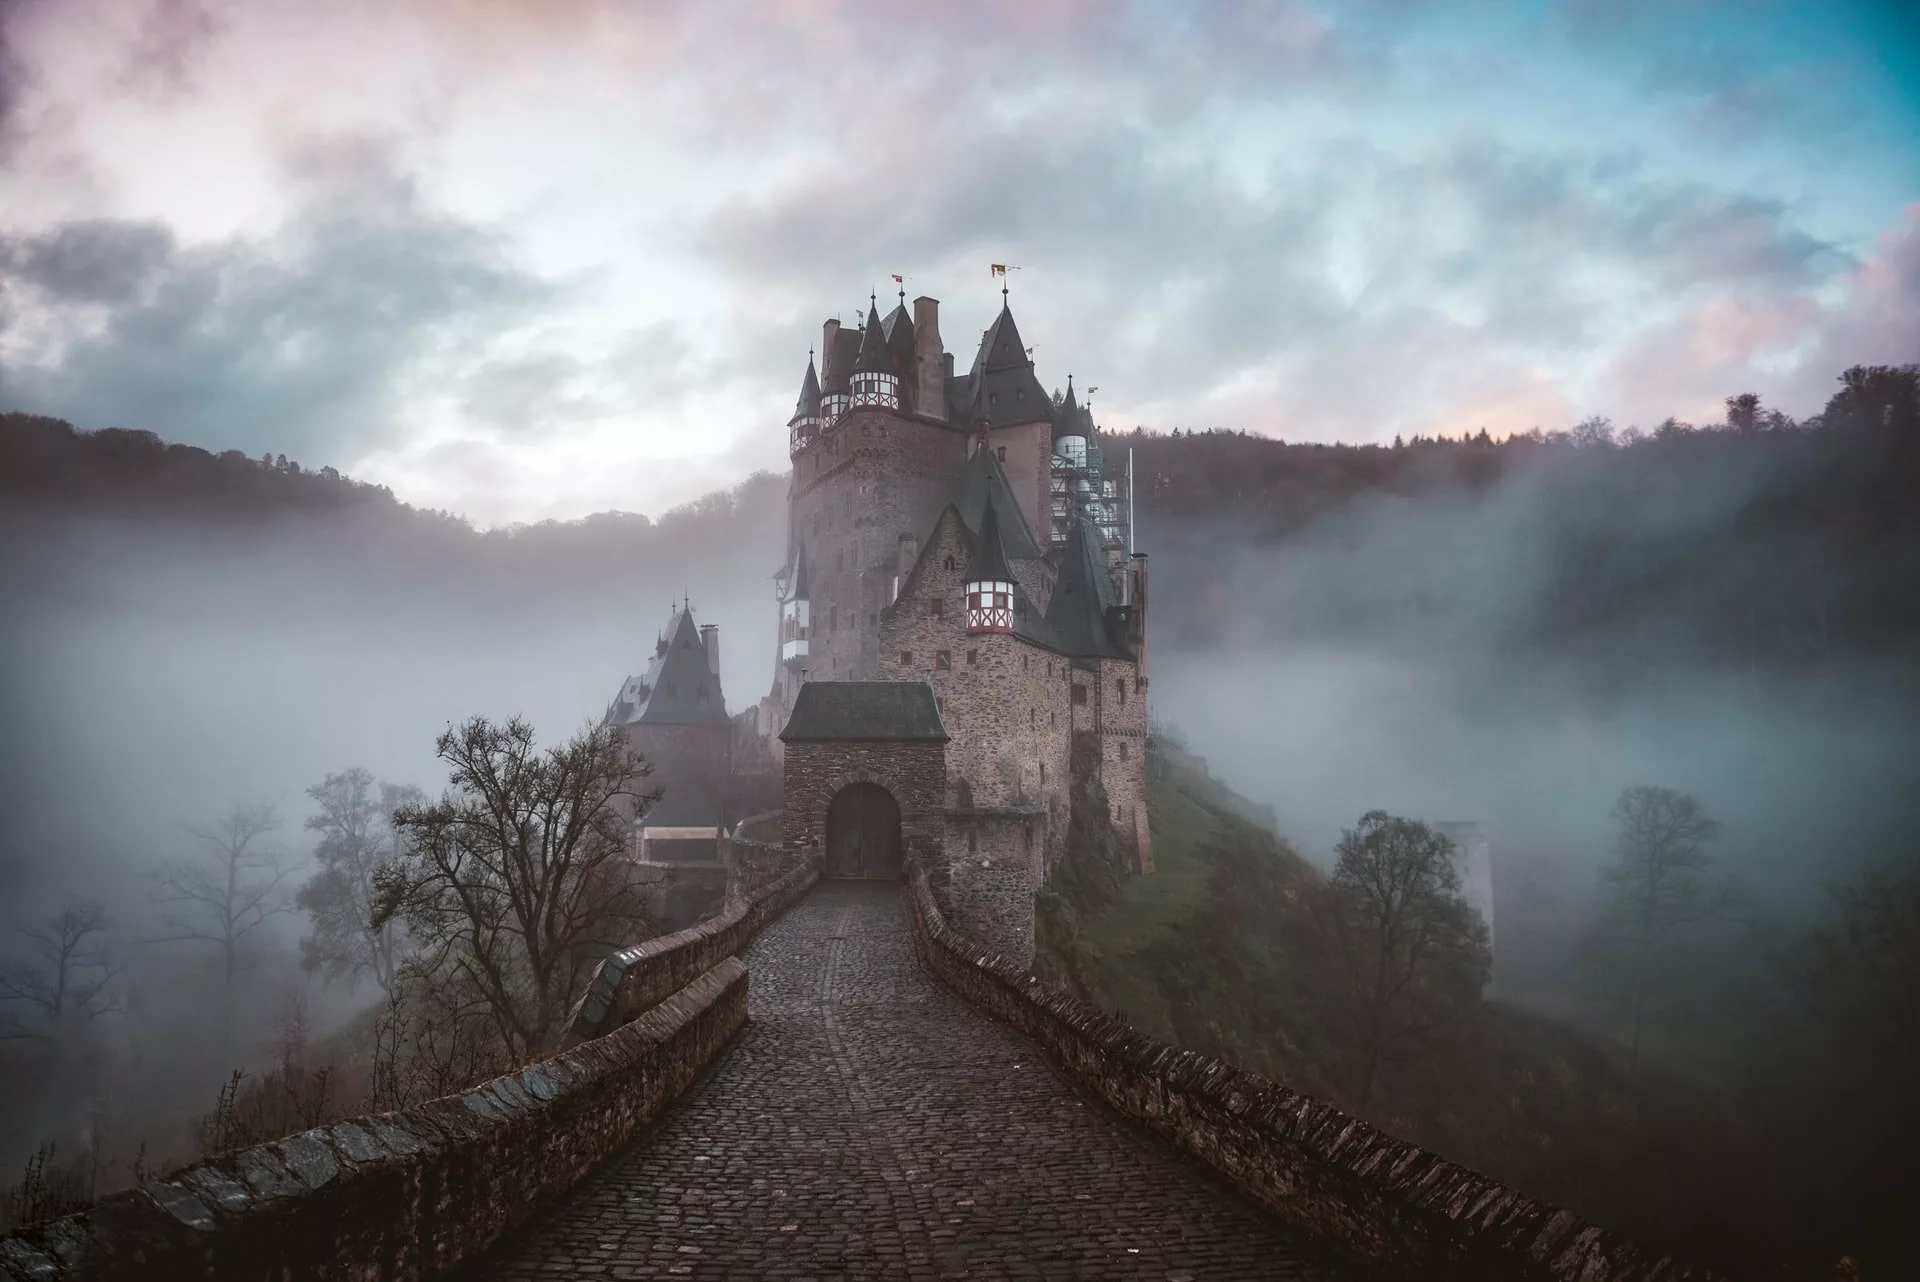 Exploring Dark German Folklore: Scary Tales from Days of Old